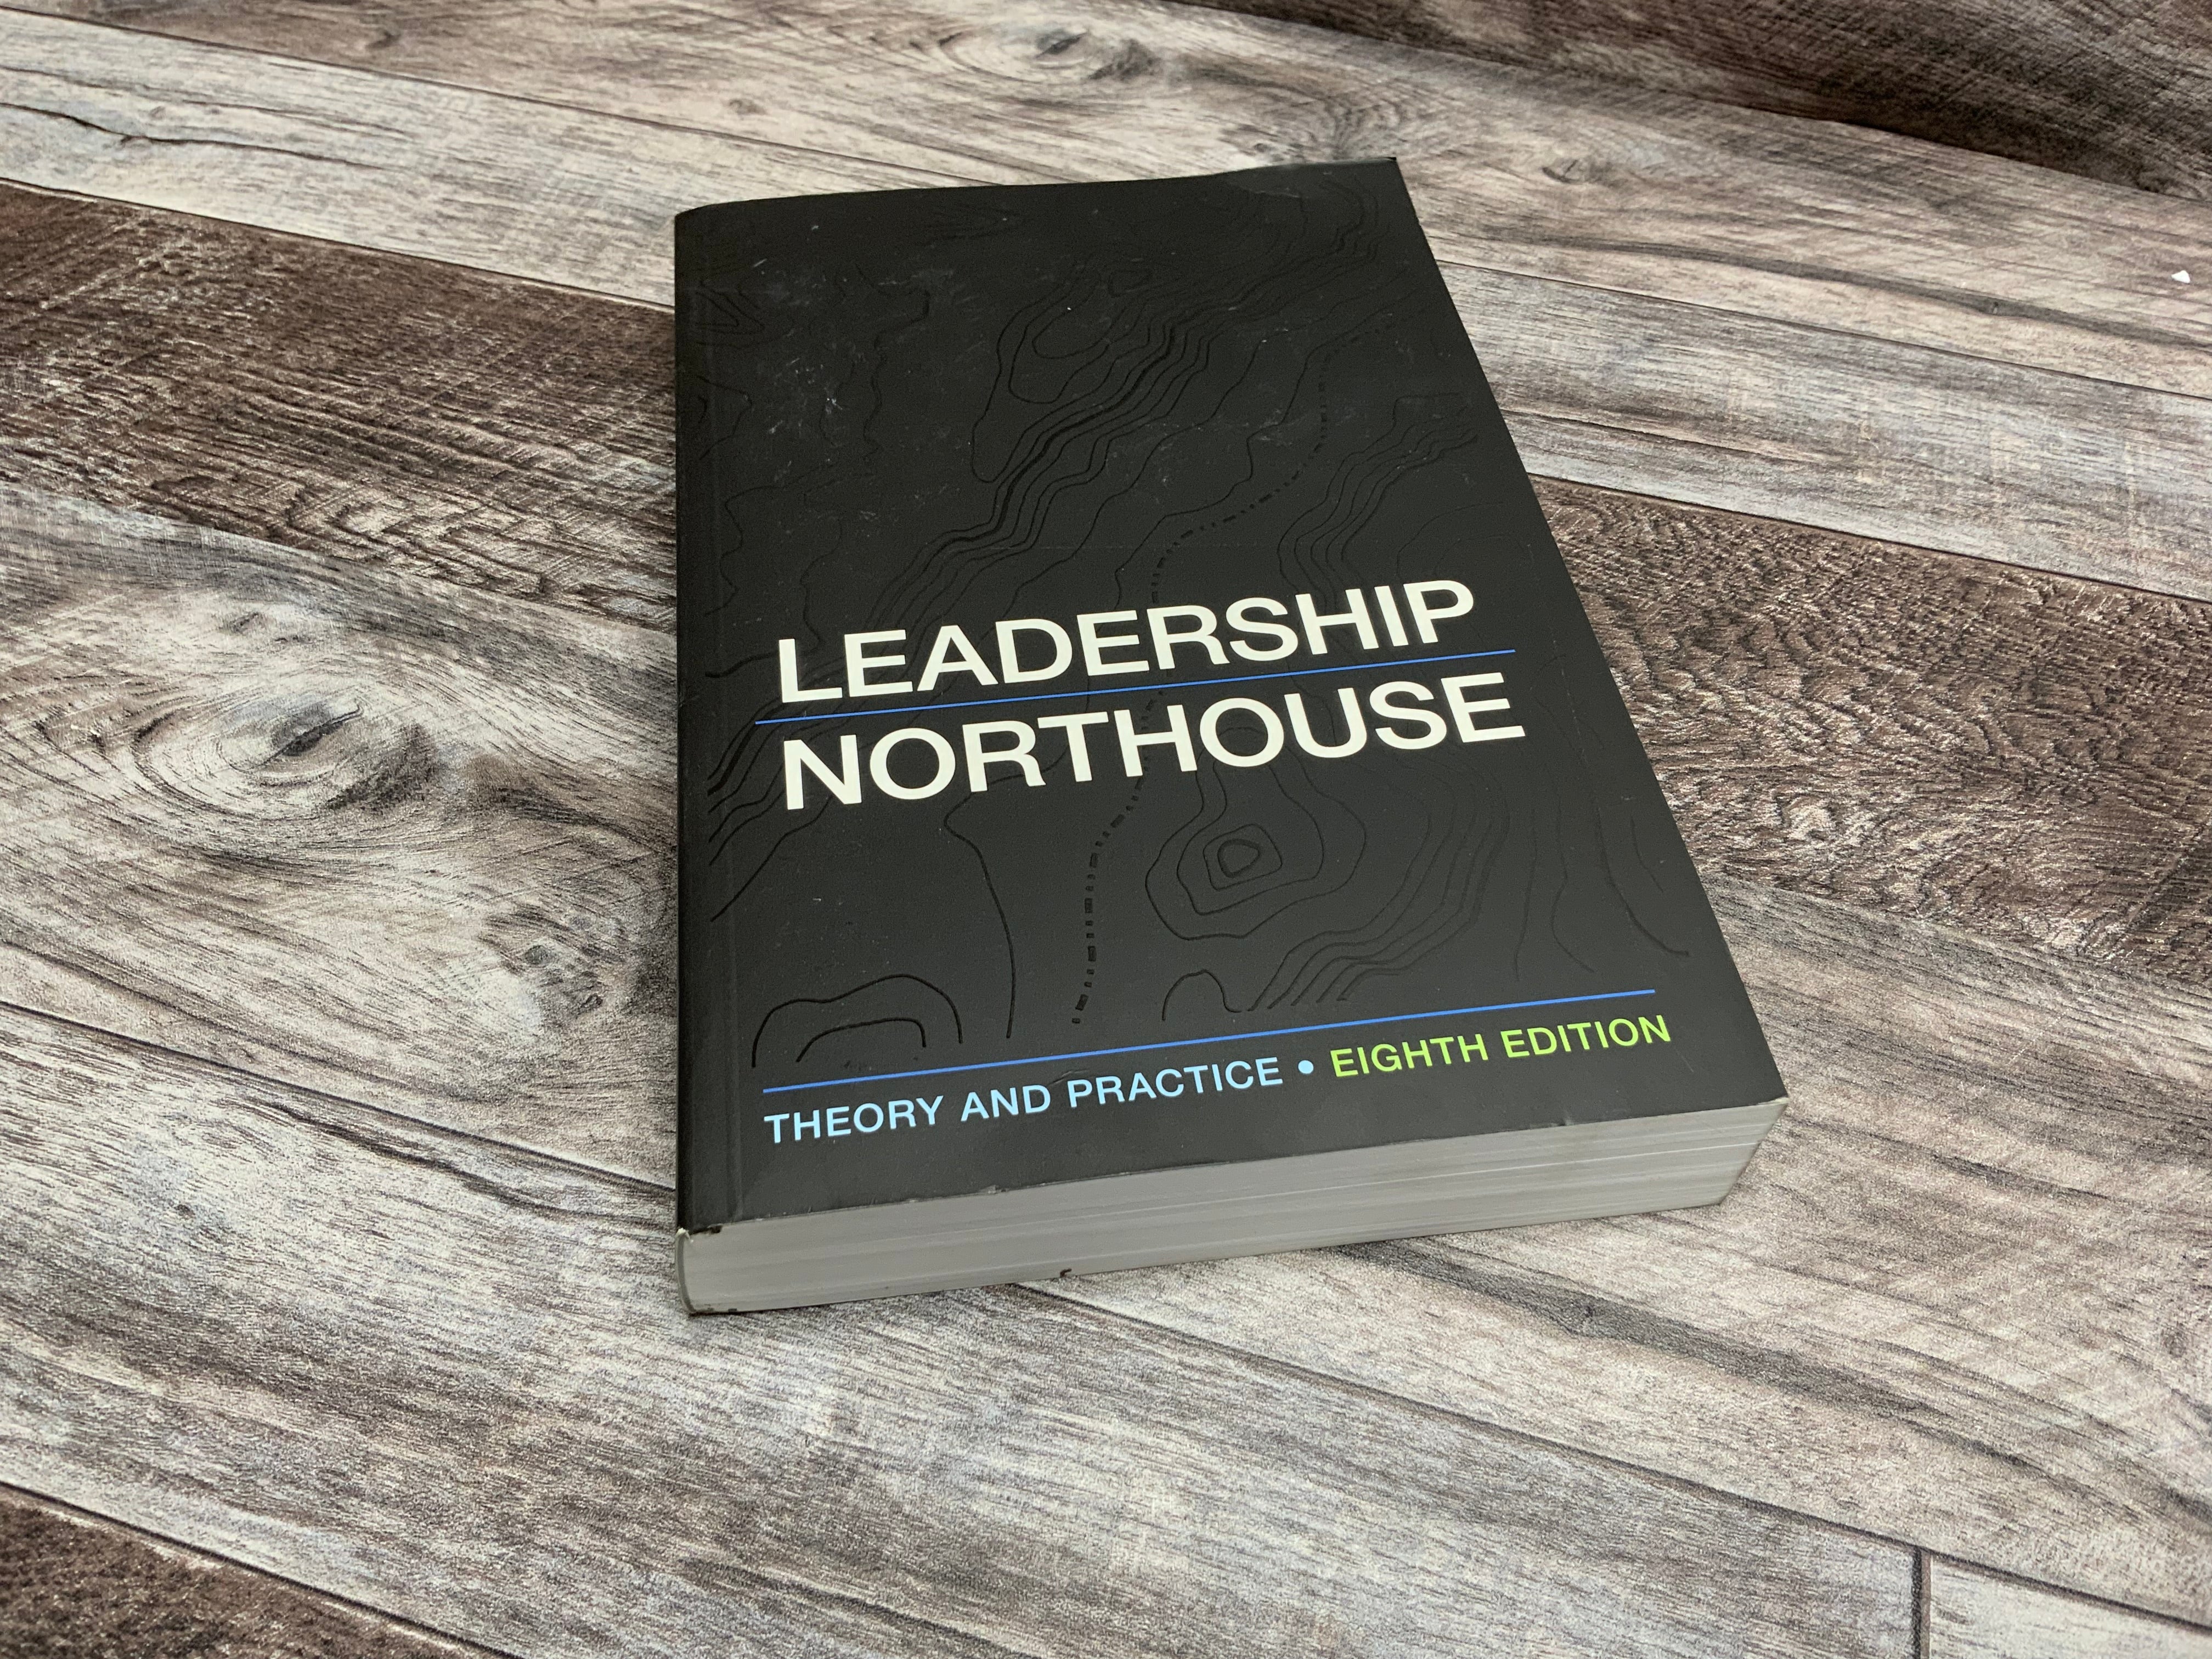 Leadership: Theory and Practice 8th Edition (8198739722478)